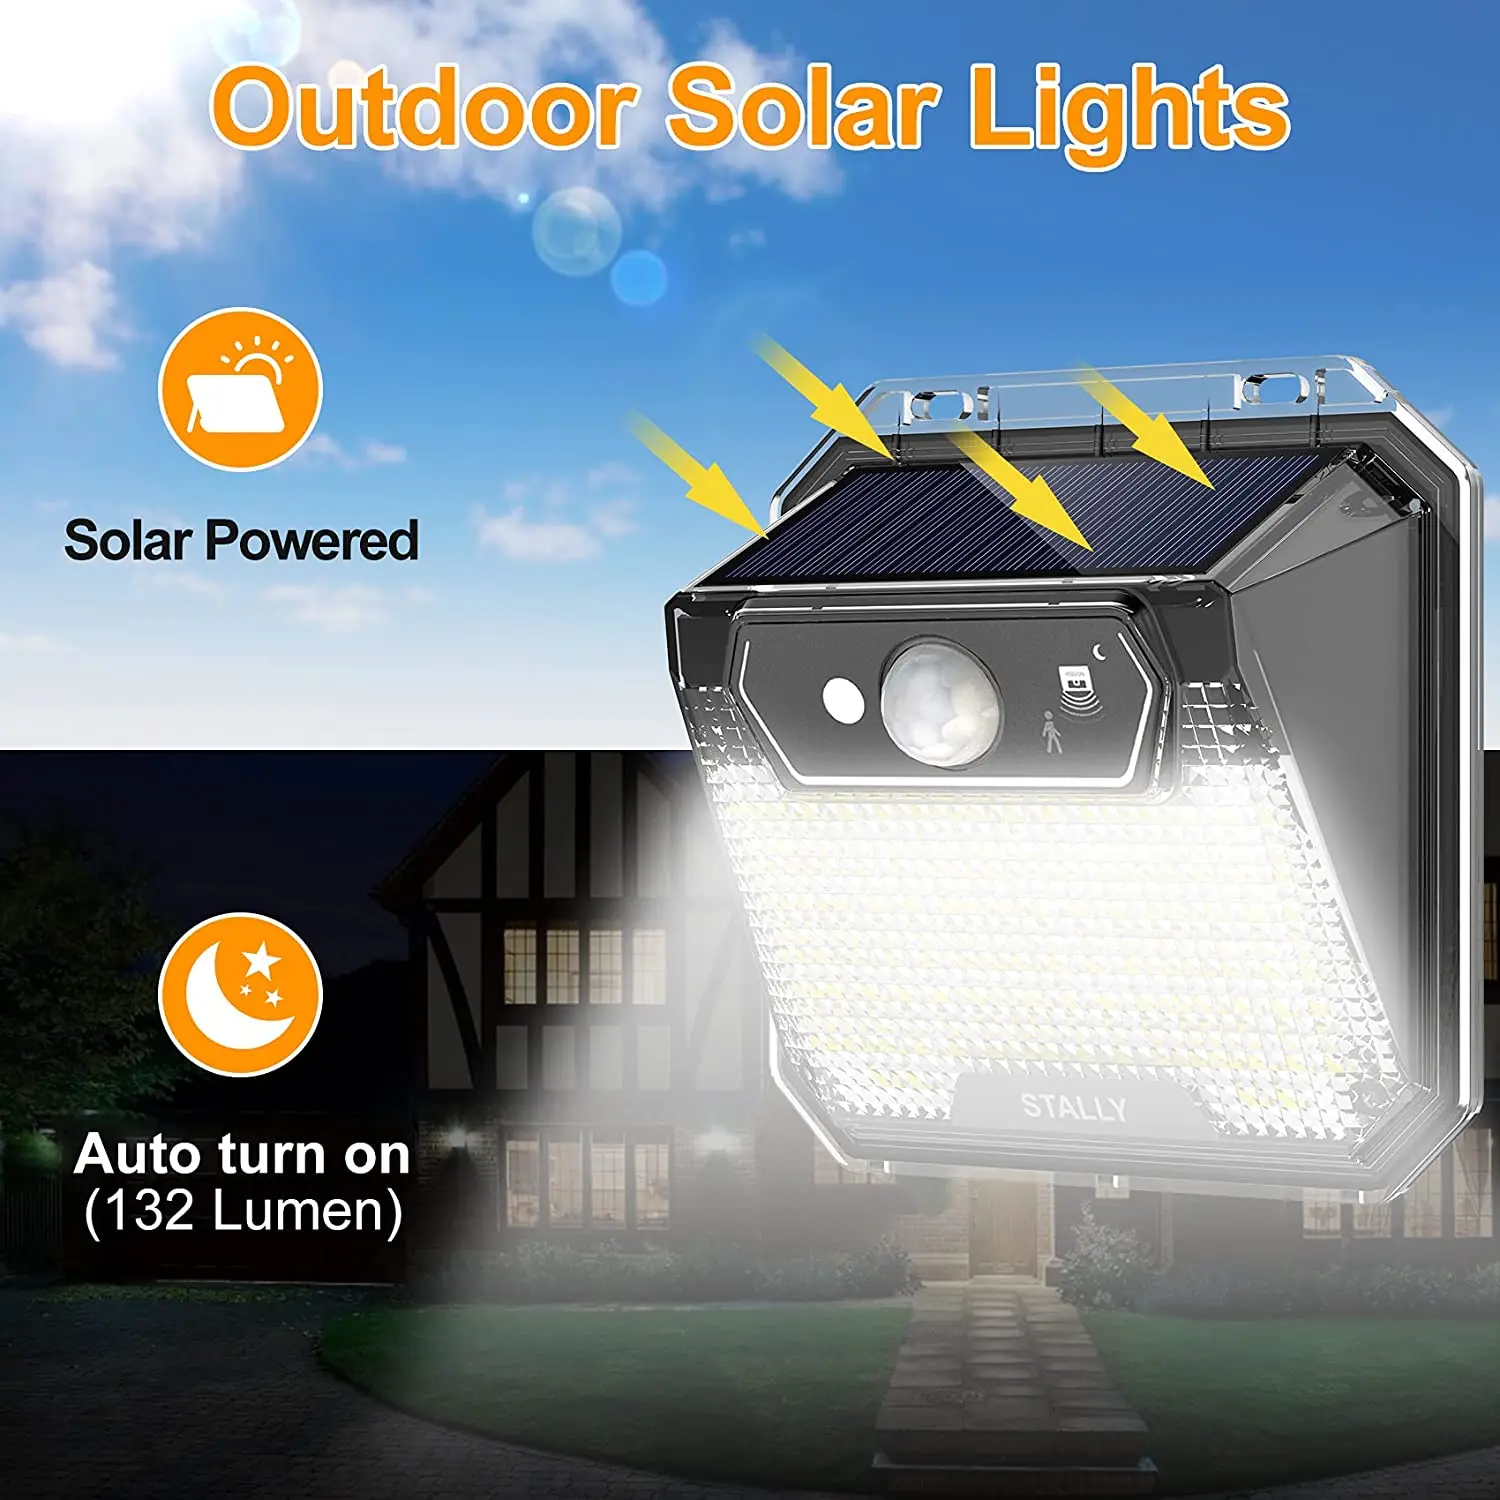 Solar Motion Lights Outdoor 148 LEDs Waterproof Solar Powered Security Wall Lights Wireless for Yard Fence Deck, Stairs, Pathway solar flood lights outdoor